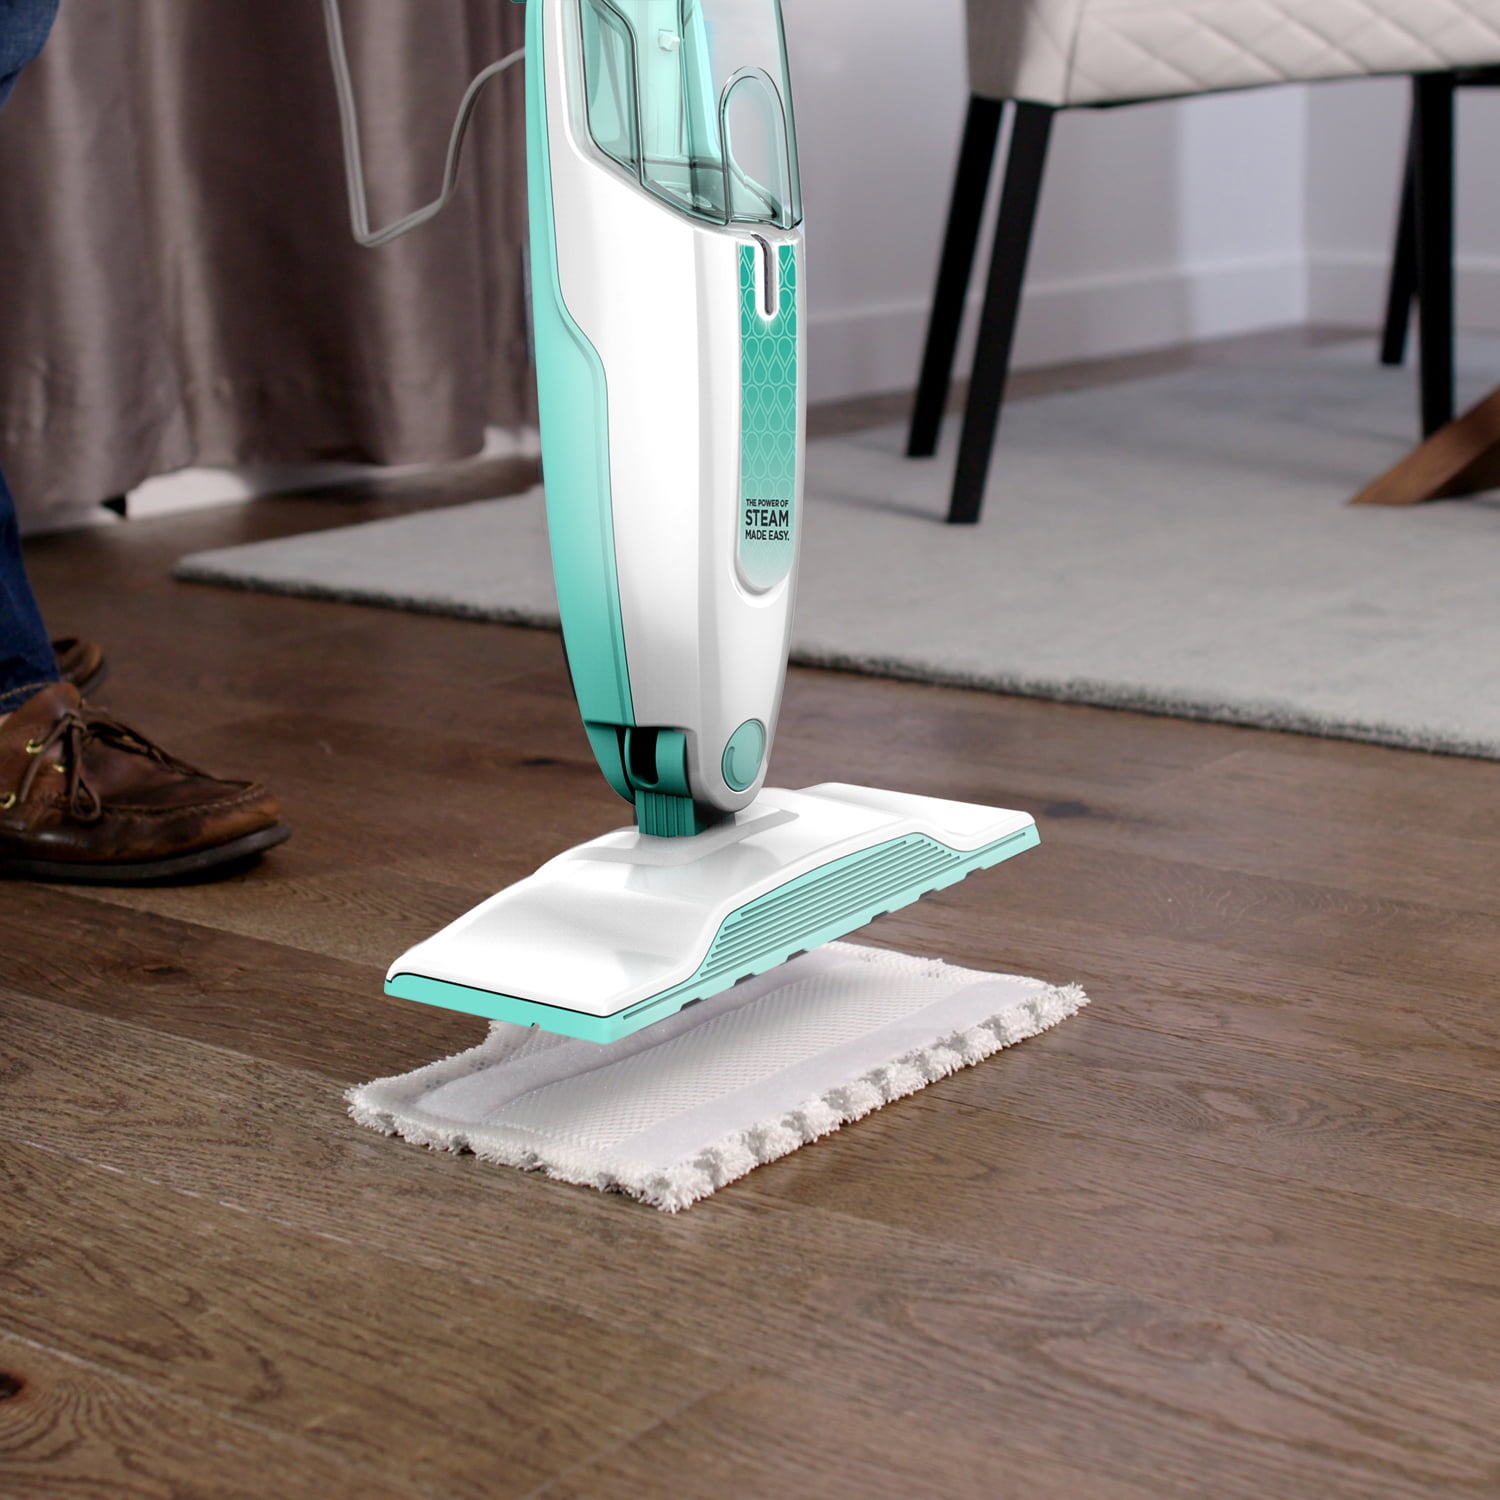 image 3 of Shark® Steam Mop Hard Floor Cleaner With XL Removable Water Tank S1000WM